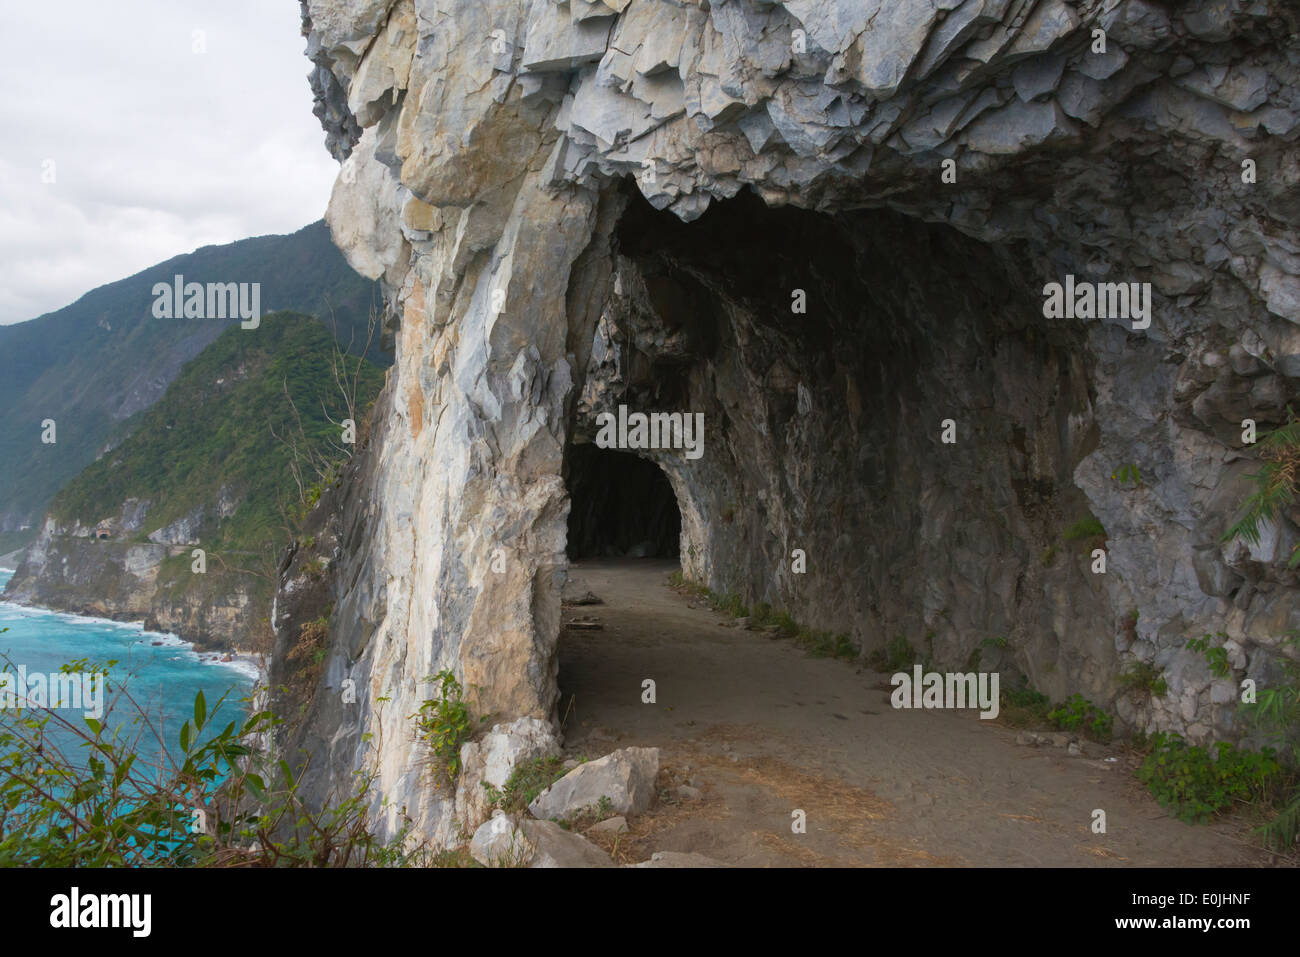 Cliff with a road built in along the east coast, Taiwan Stock Photo